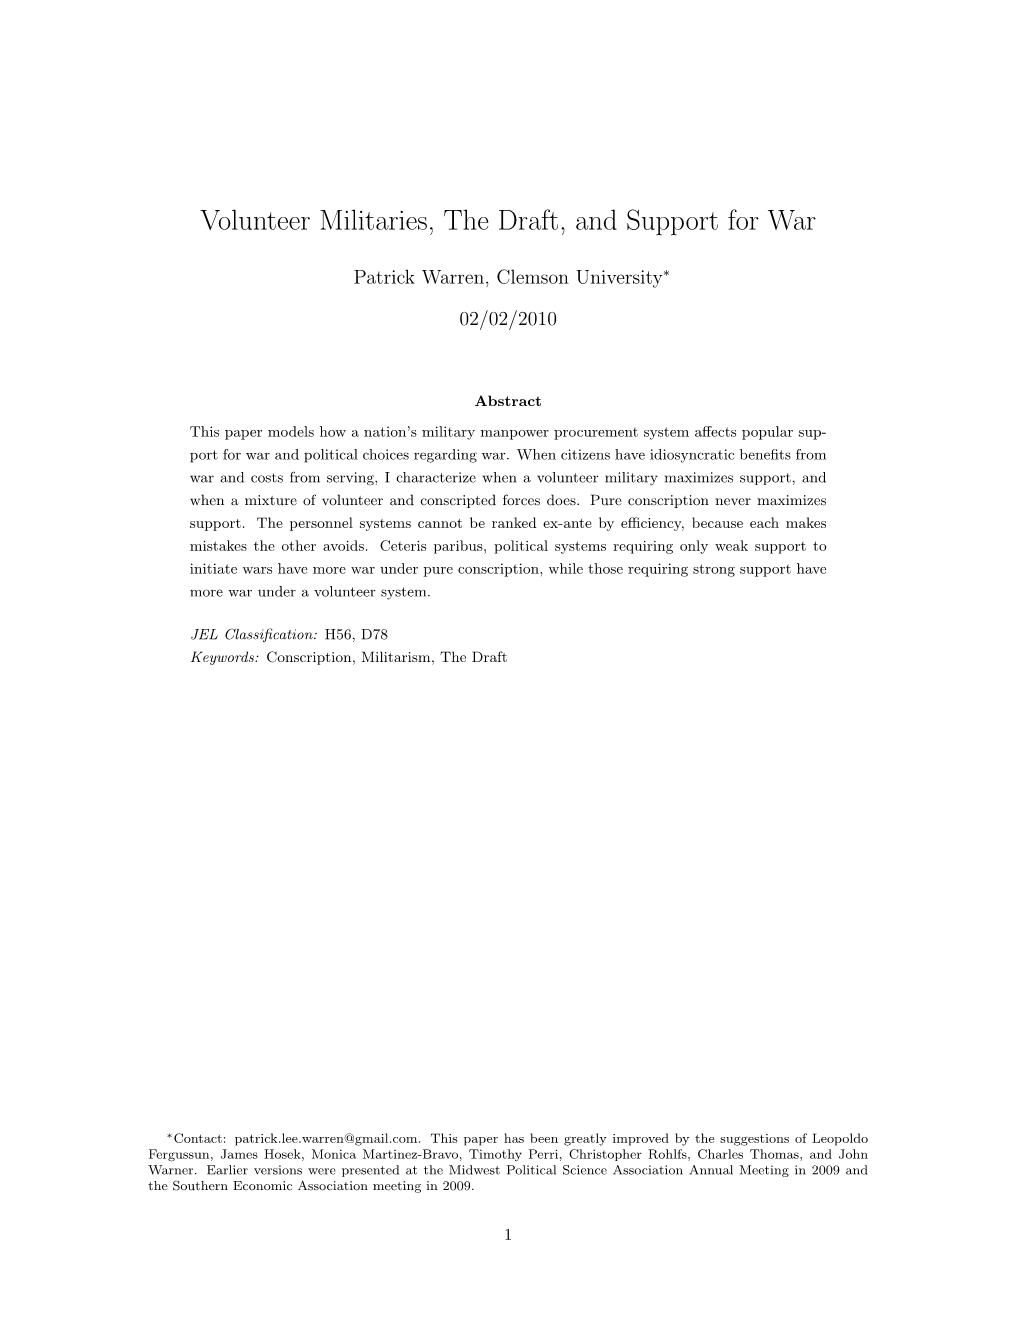 Volunteer Militaries, the Draft, and Support for War